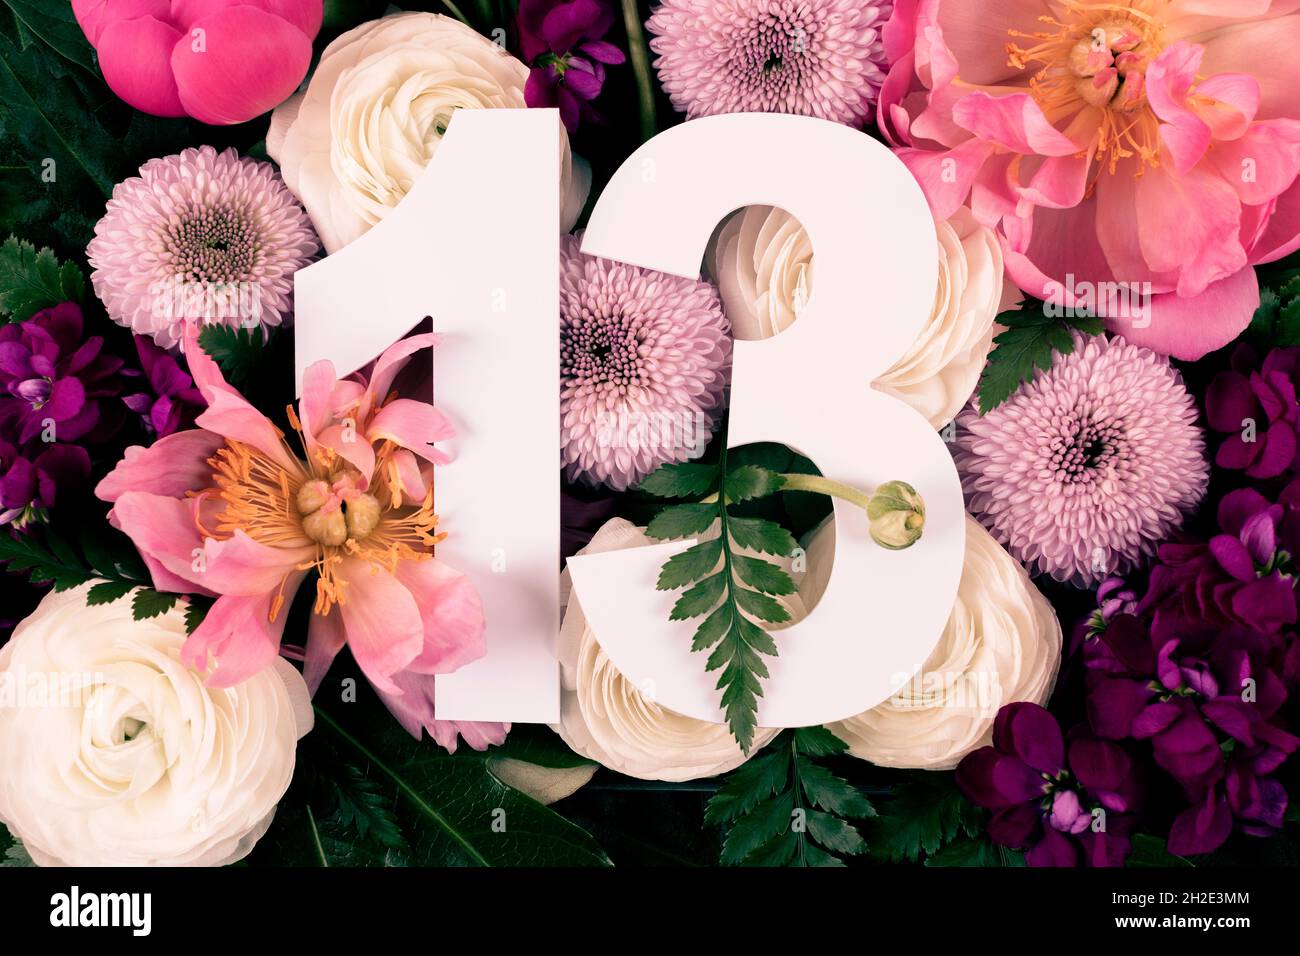 Layout with colorful flowers, leaves and number thirteen. Chrysanthemum Momoko, Peony, Matthiola, Ranunculus flowers background. Greeting card. Trendy Stock Photo